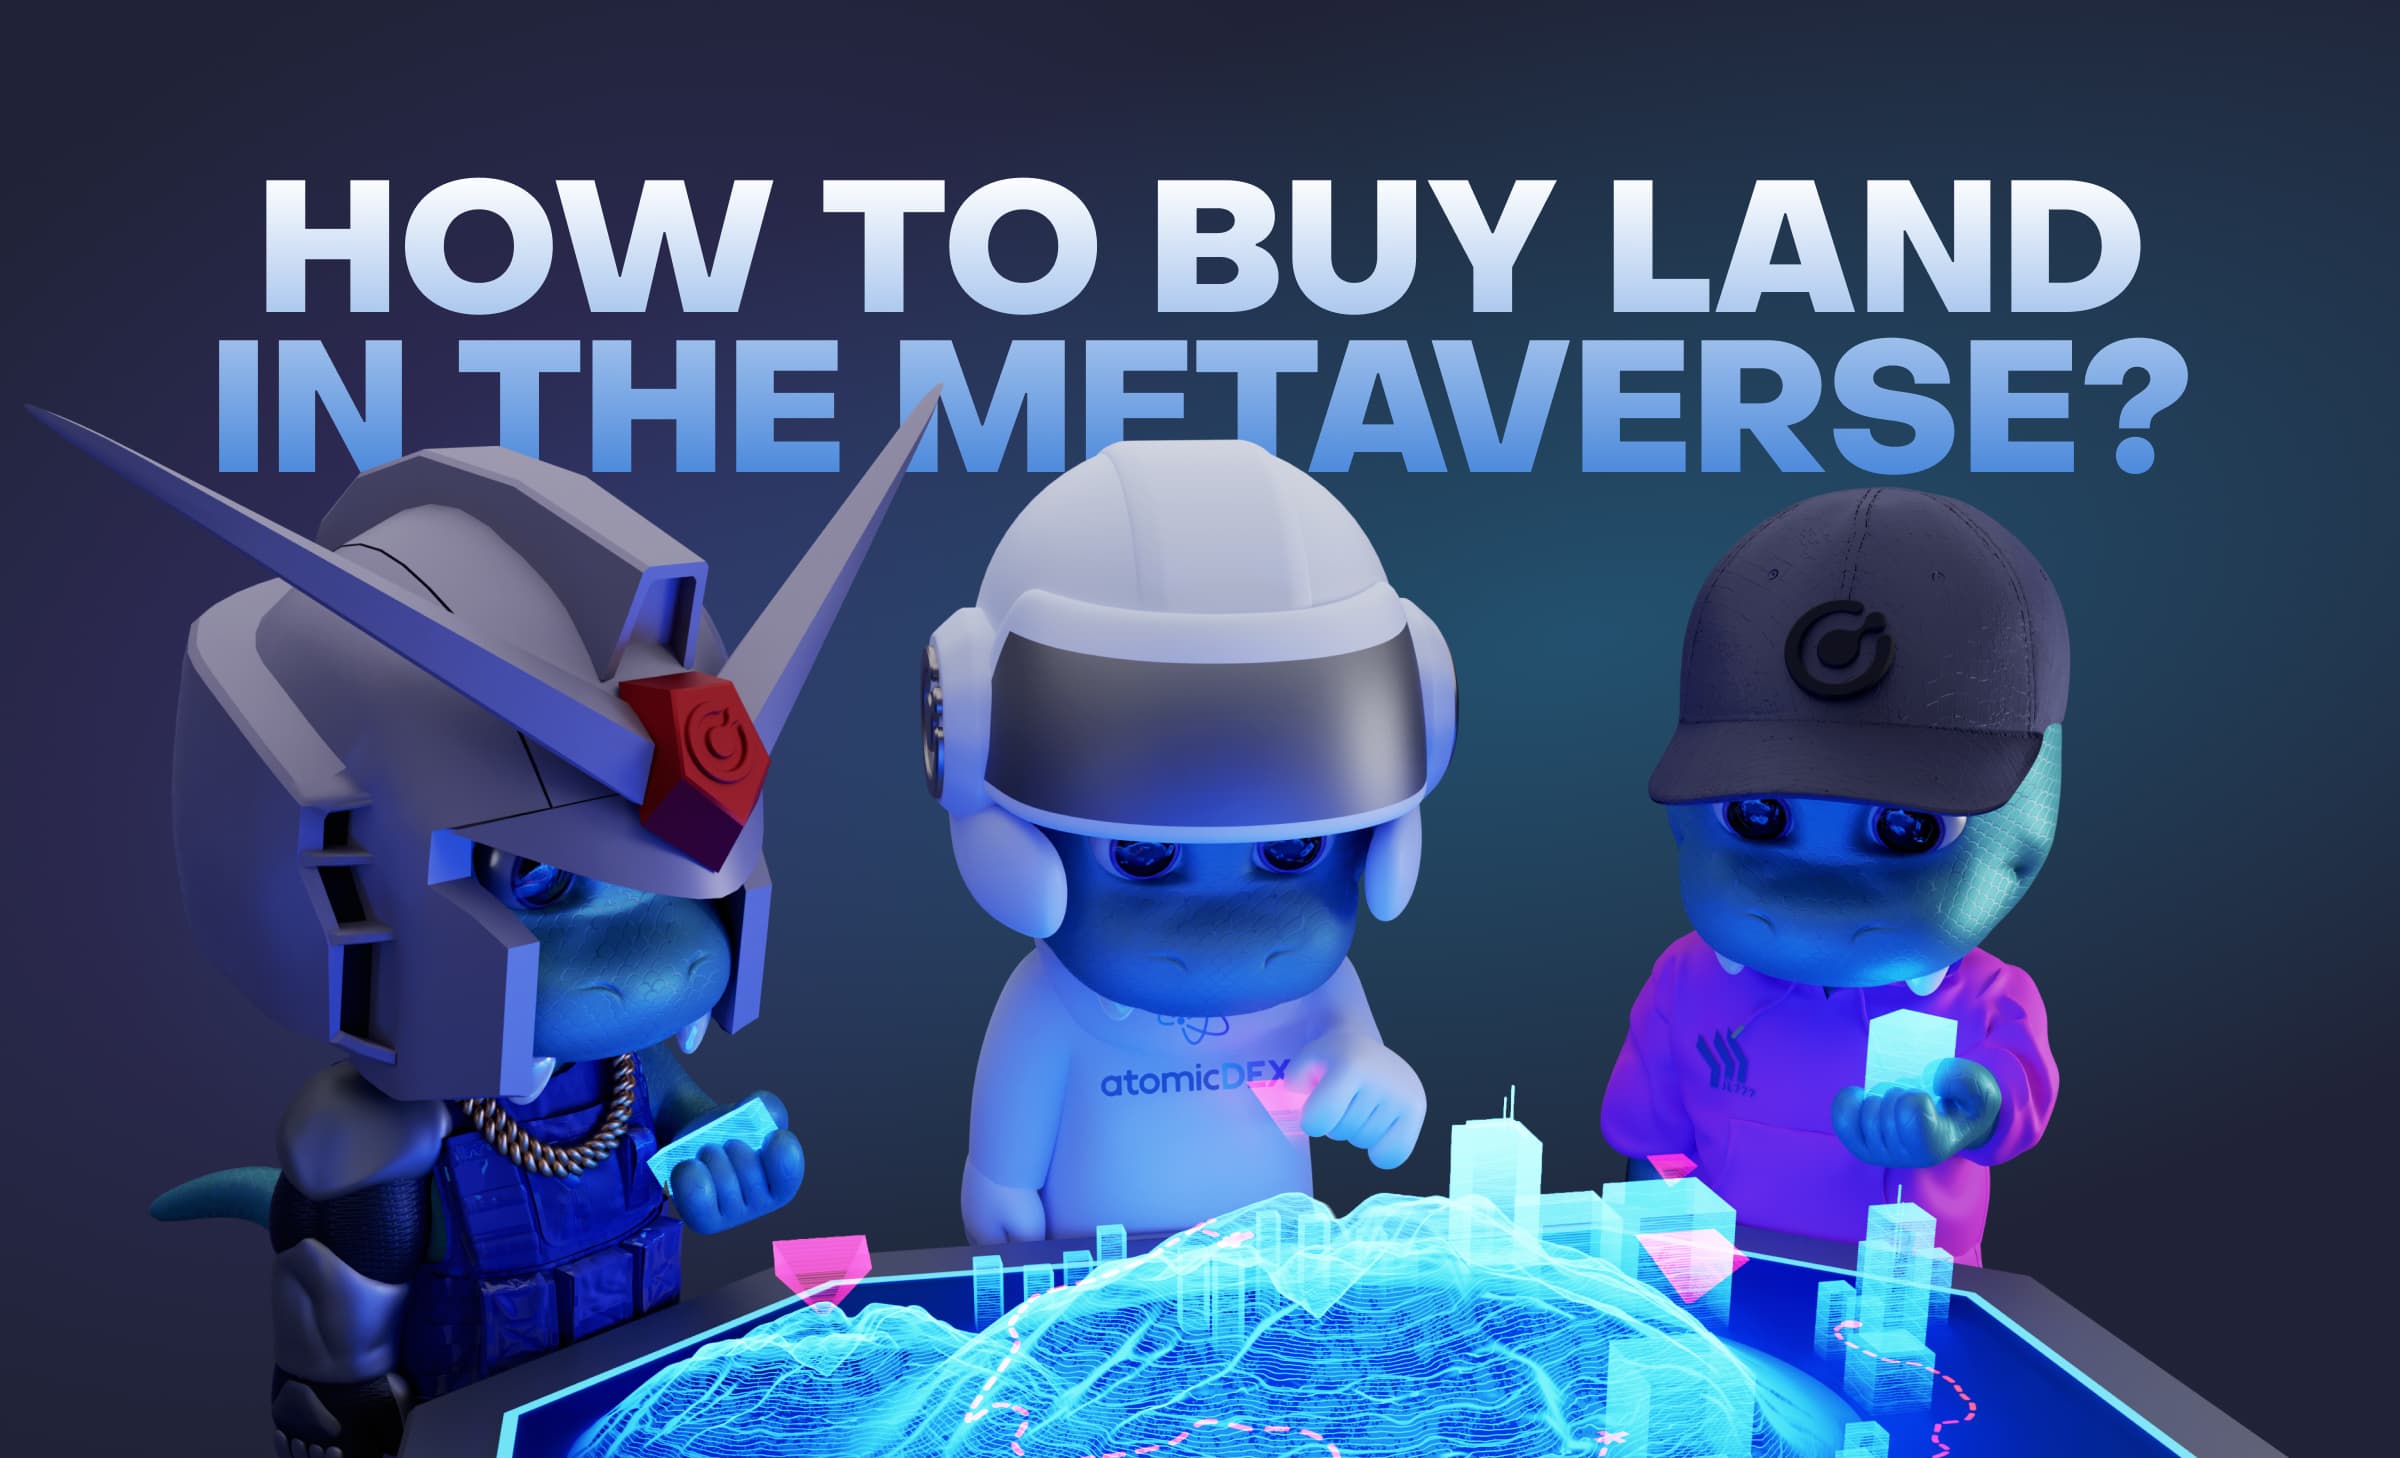 How to Buy Land in the Metaverse